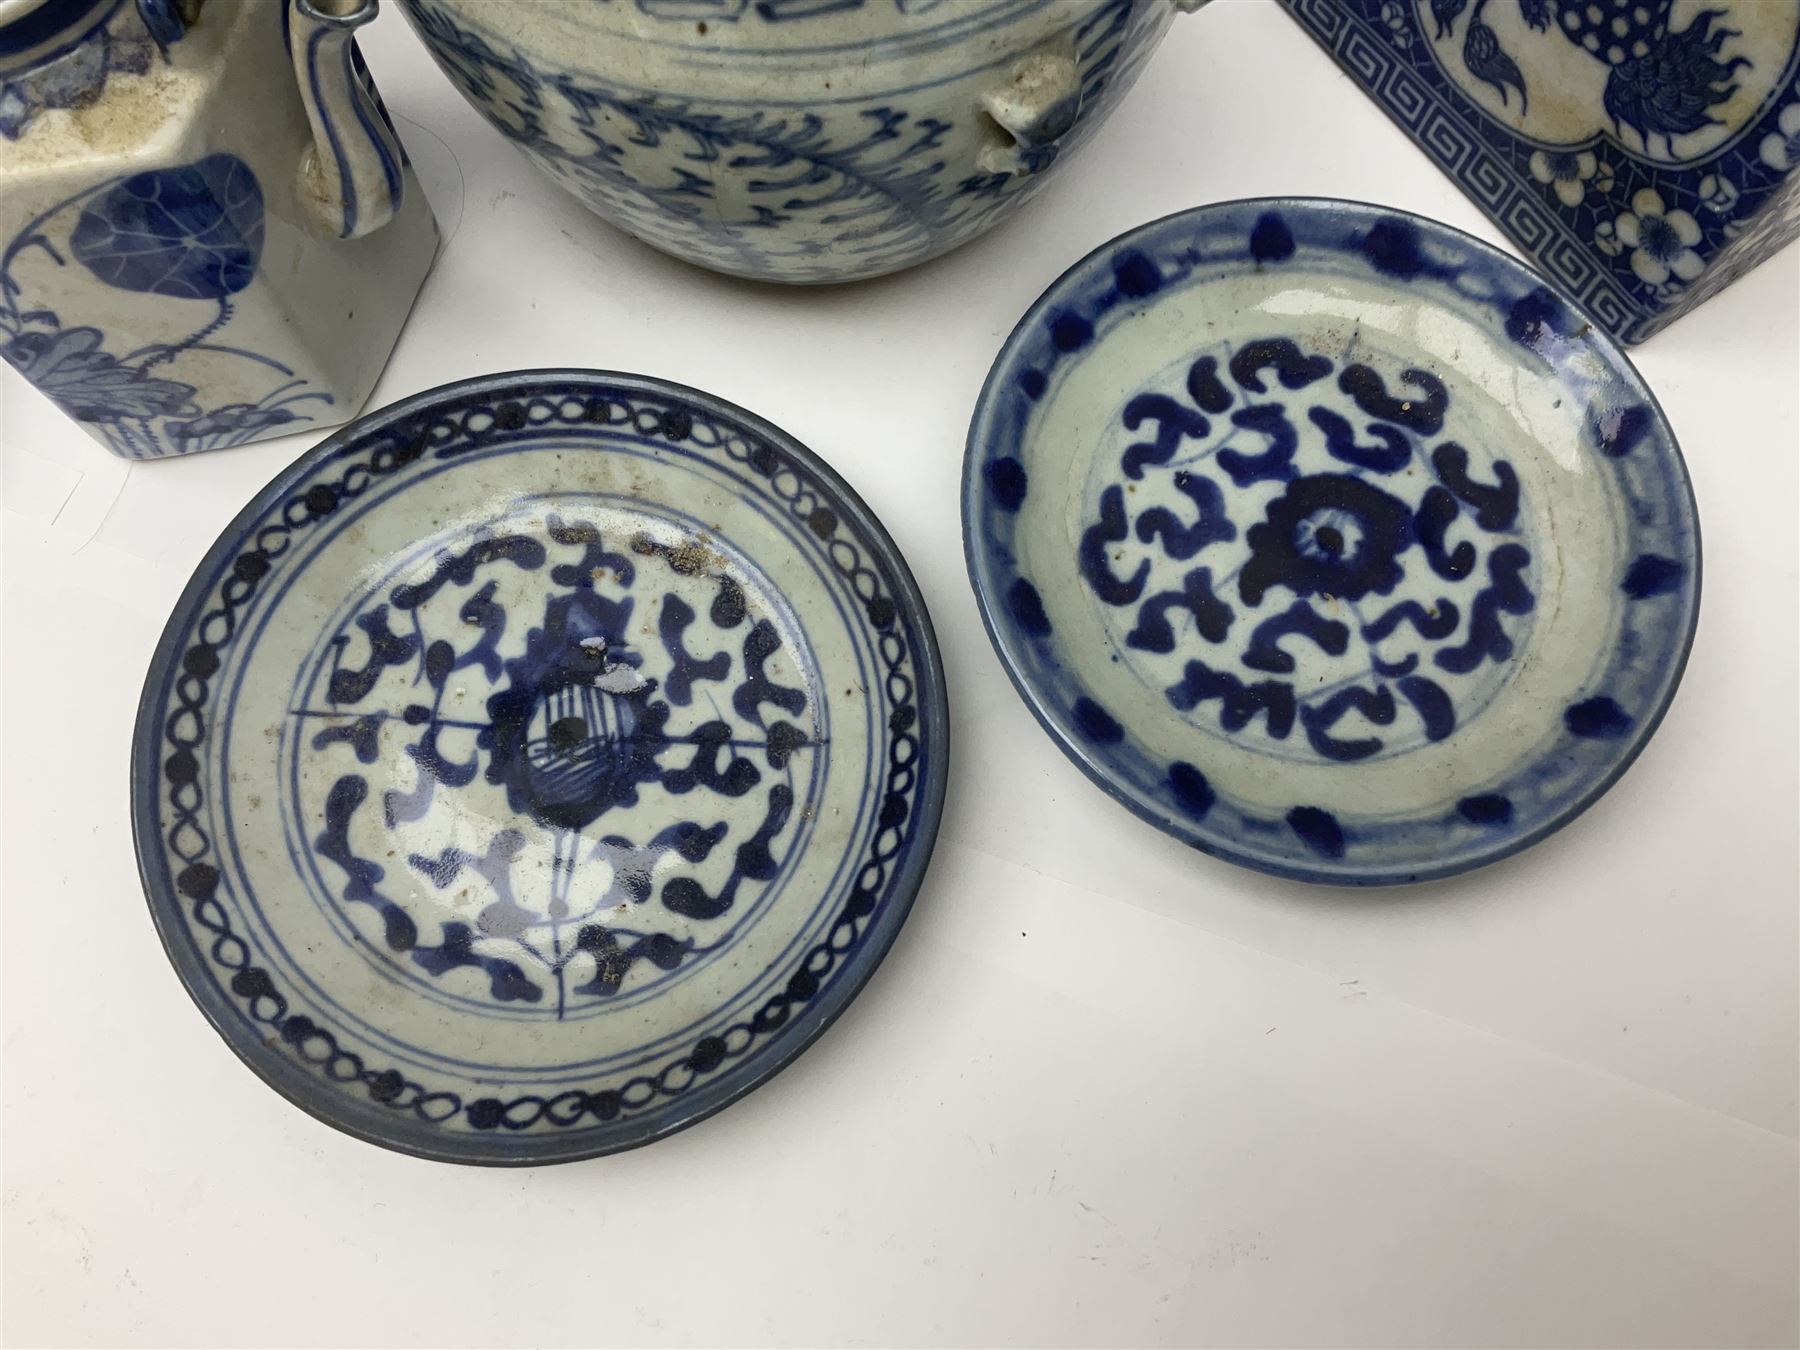 Two Chinese ceramic blue and white opium pillows with pierced ends - Image 2 of 10